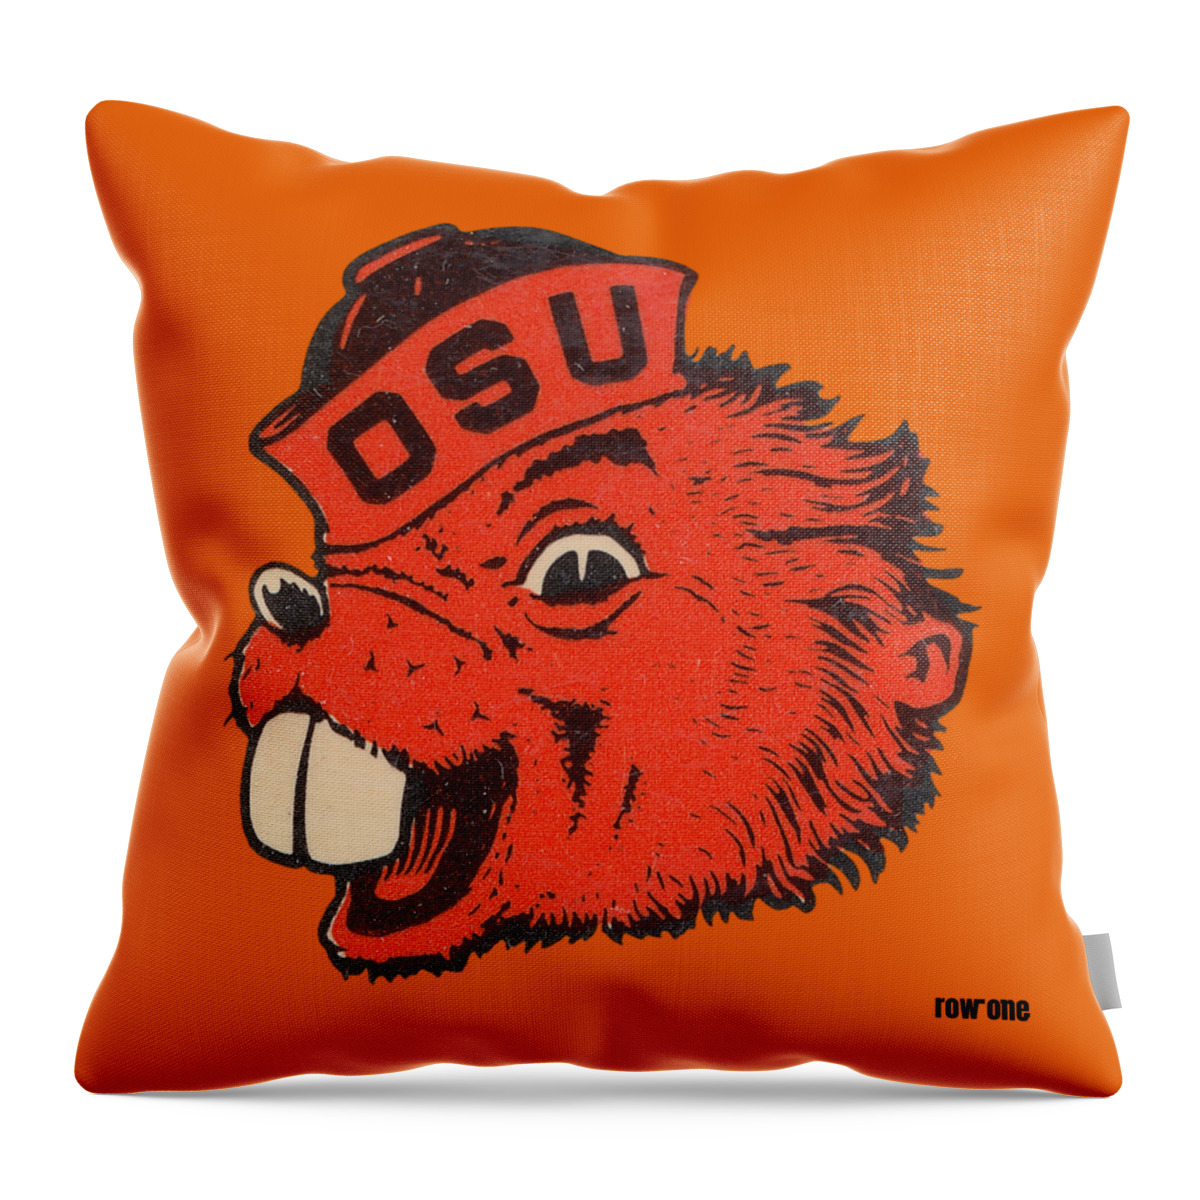 Benny Beaver Throw Pillow featuring the mixed media 1973 Benny Beaver Art by Row One Brand